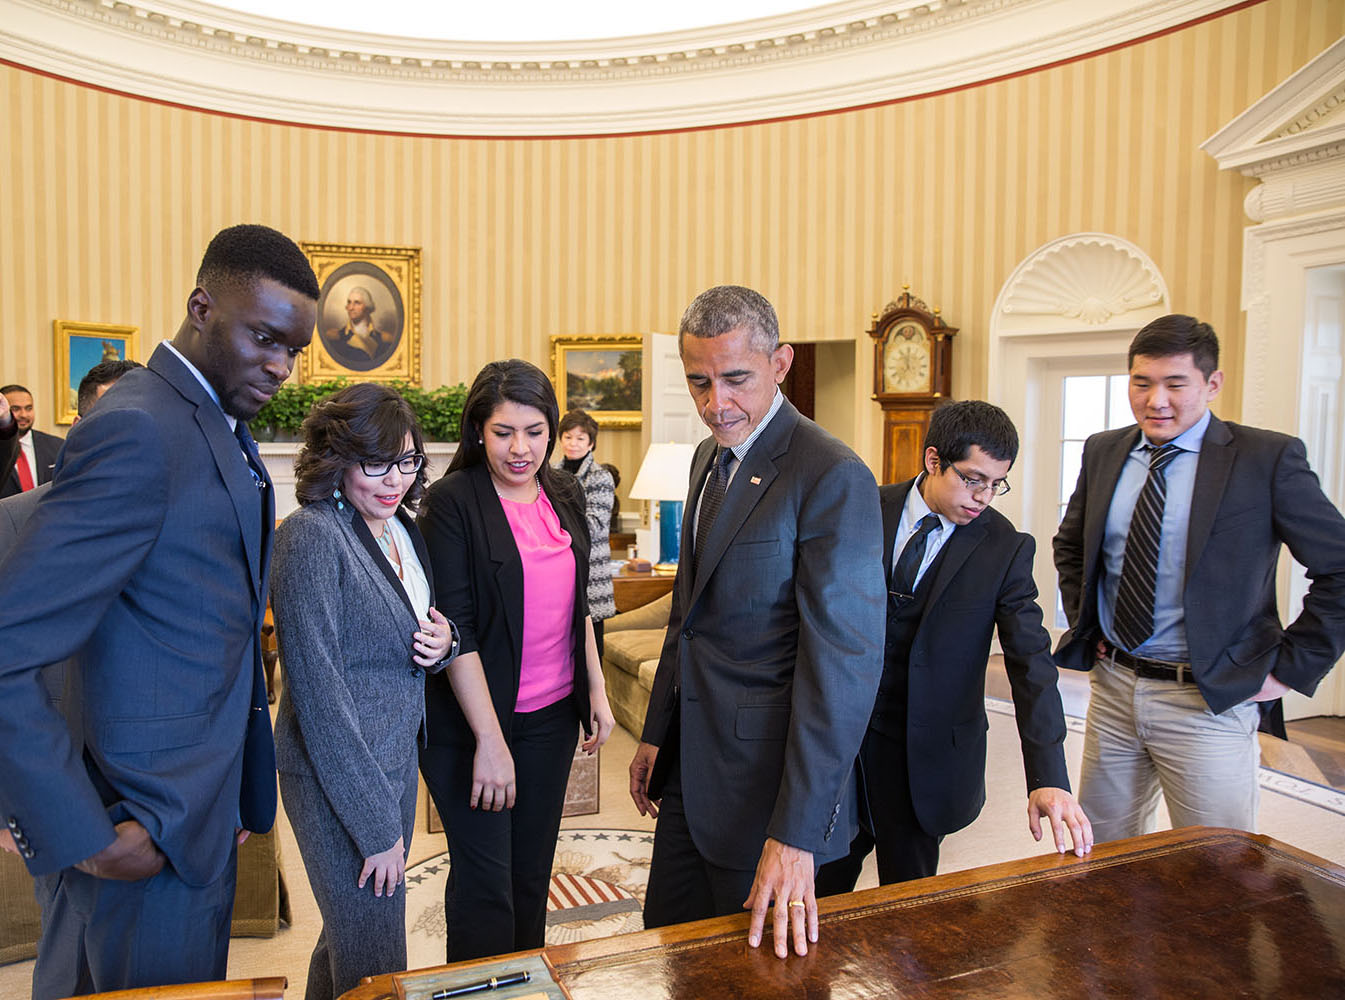 President Barack Obama shows the Resolute Desk to a group of DREAMers, following their Oval Office meeting in which they talked about how they have benefited from the Deferred Action for Childhood Arrivals (DACA) program, Feb. 4, 2015.